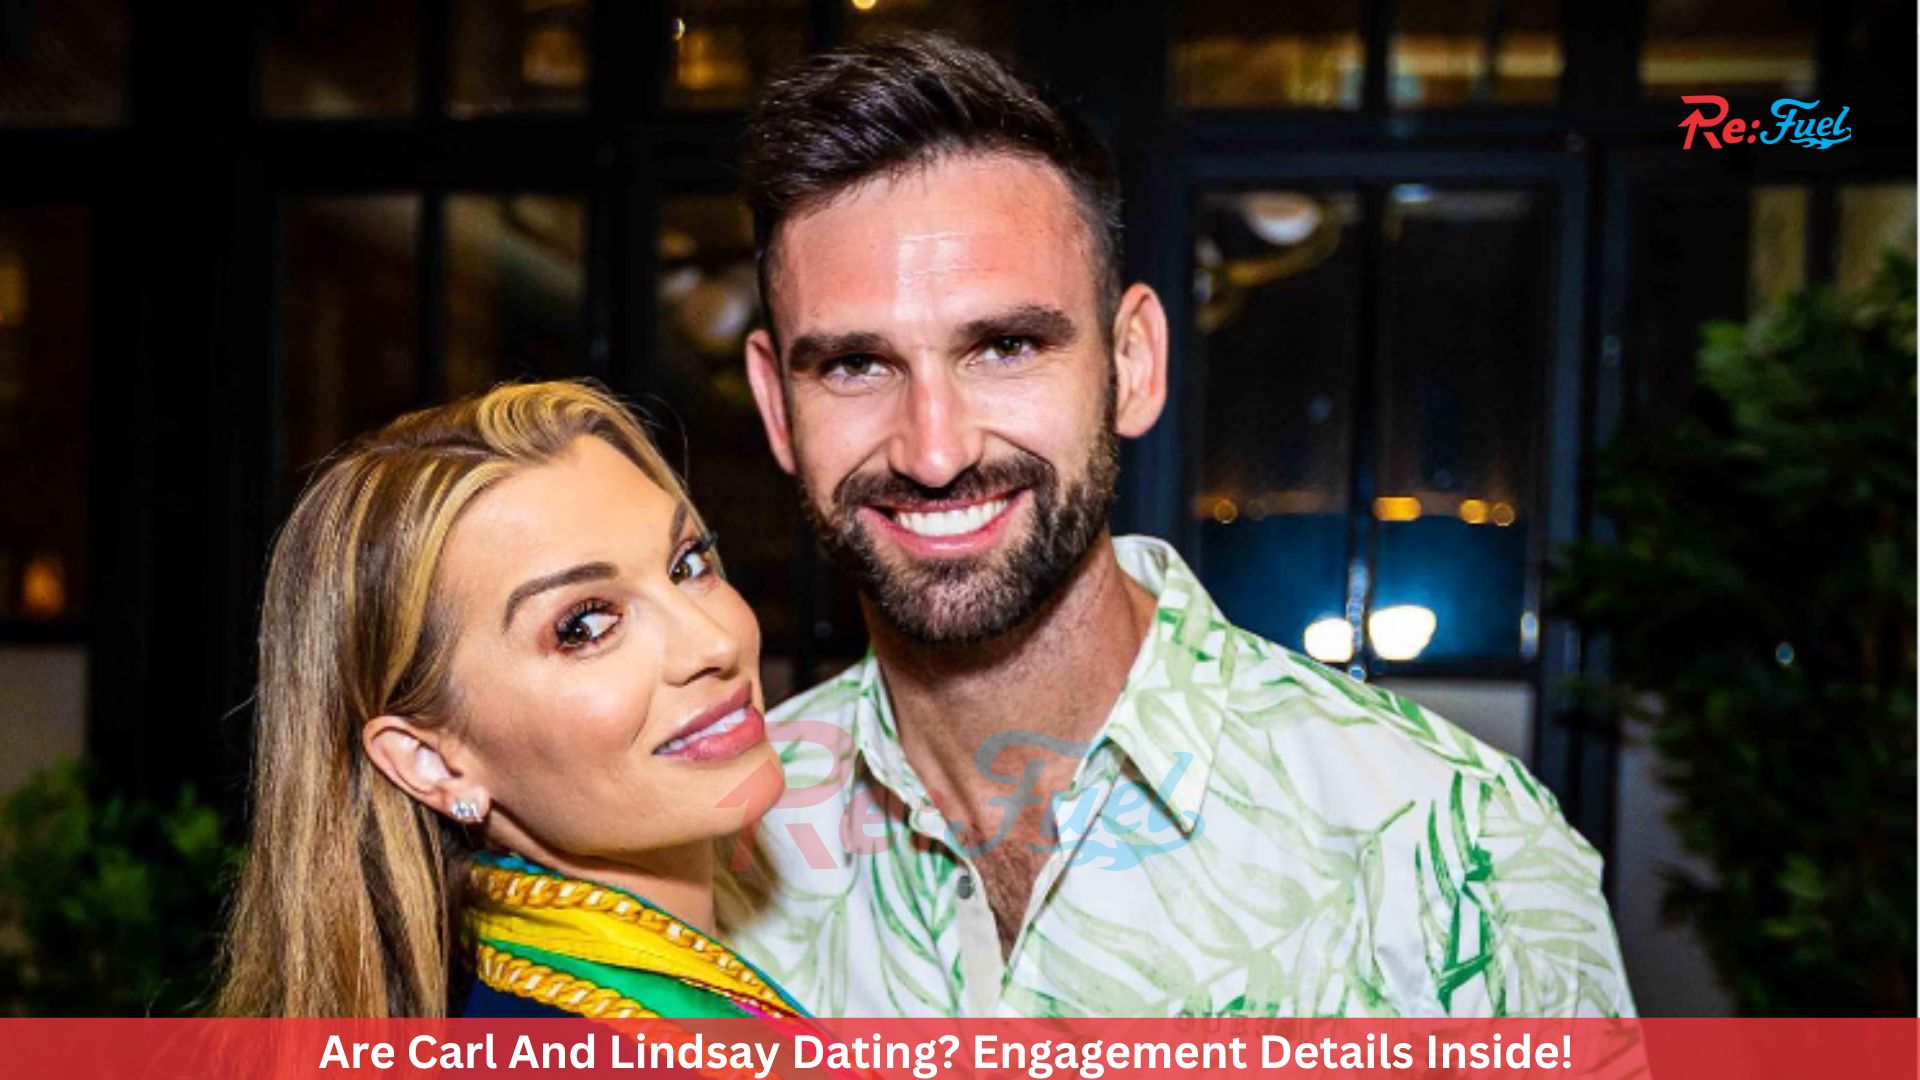 Are Carl And Lindsay Dating? Engagement Details Inside!